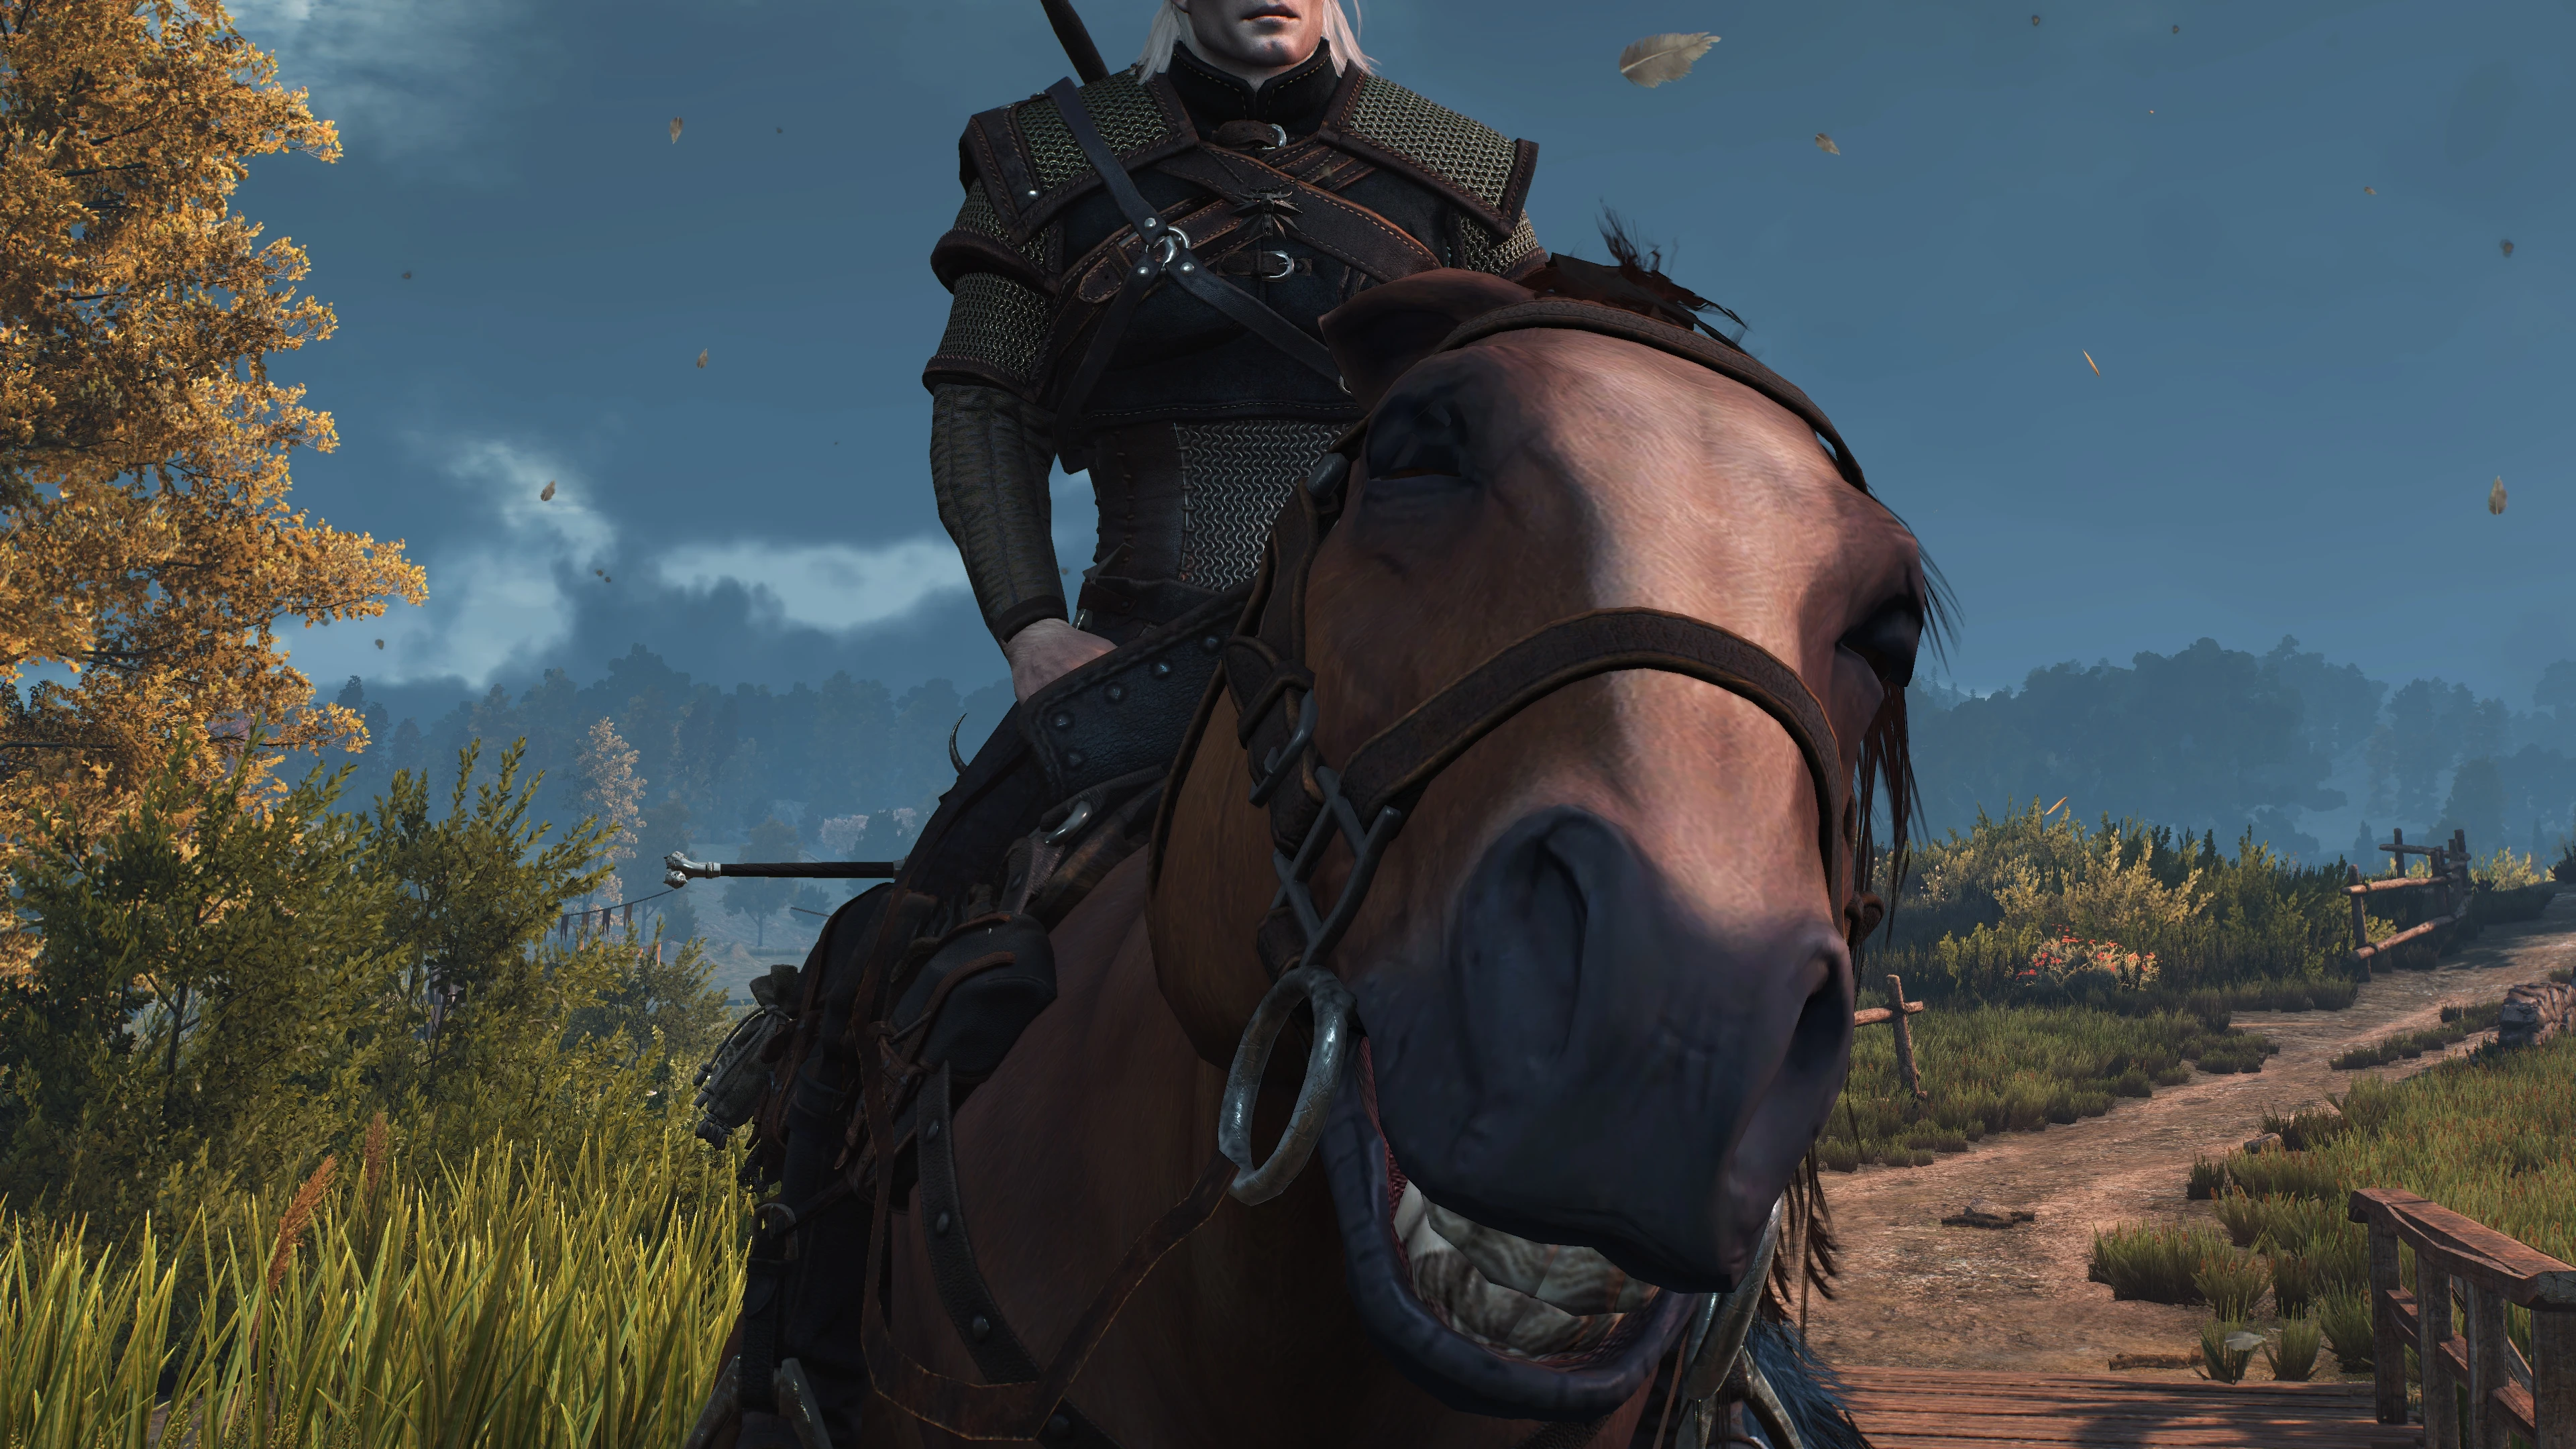 Jolly Roach At The Witcher 3 Nexus Mods And Community.